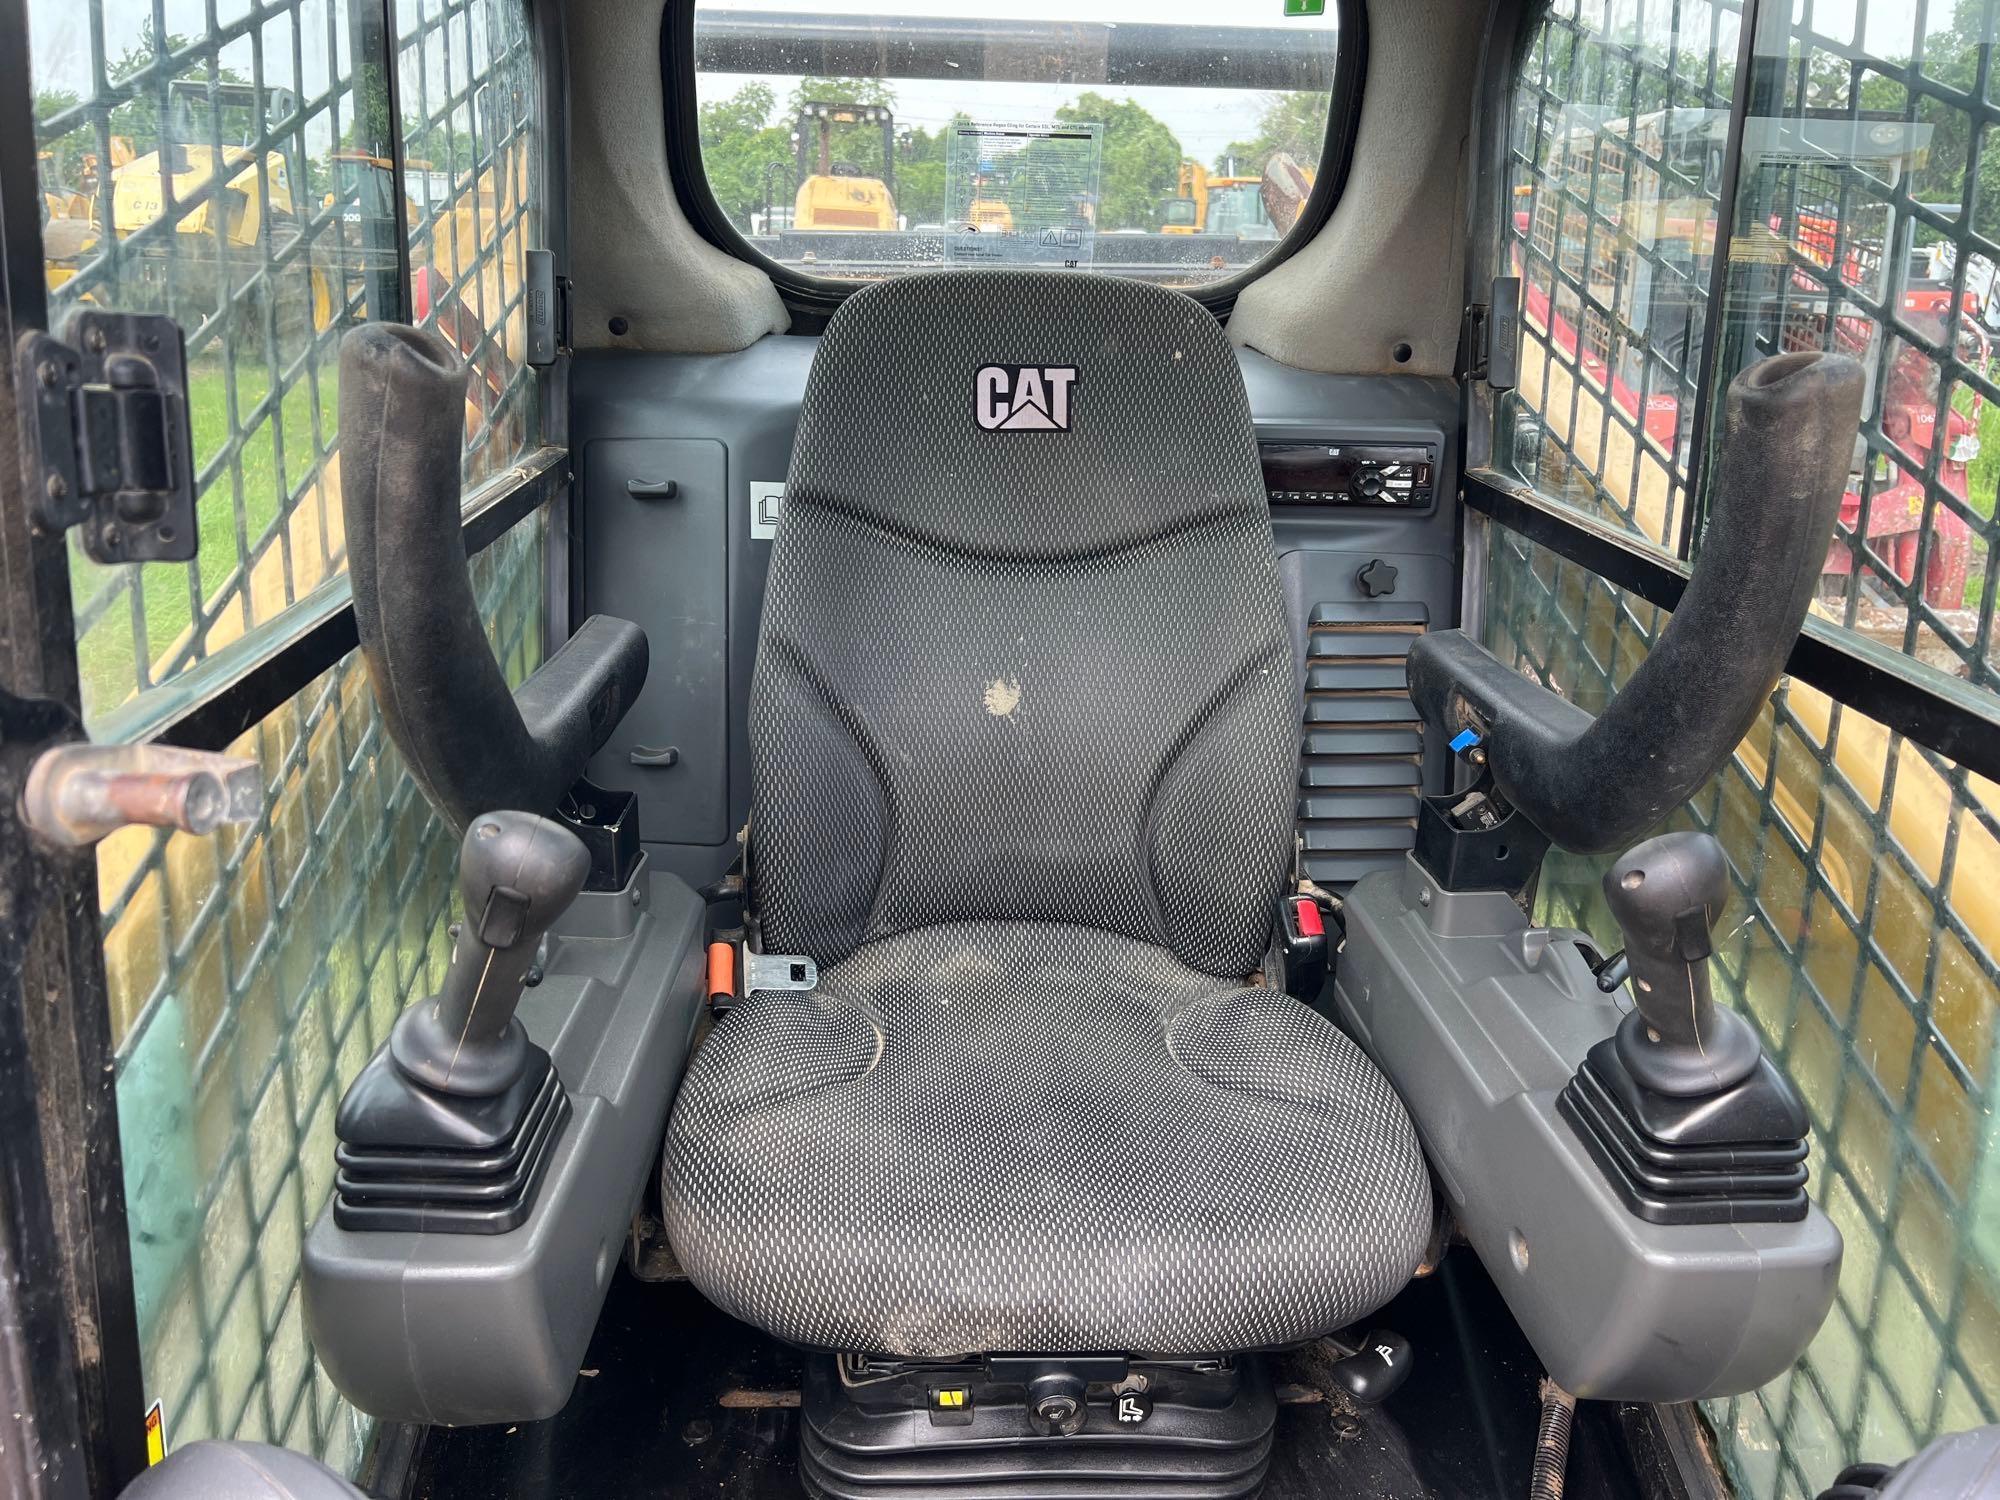 2019 CAT 259D3 RUBBER TRACKED SKID STEER SN:CW903577 powered by Cat diesel engine, equipped with